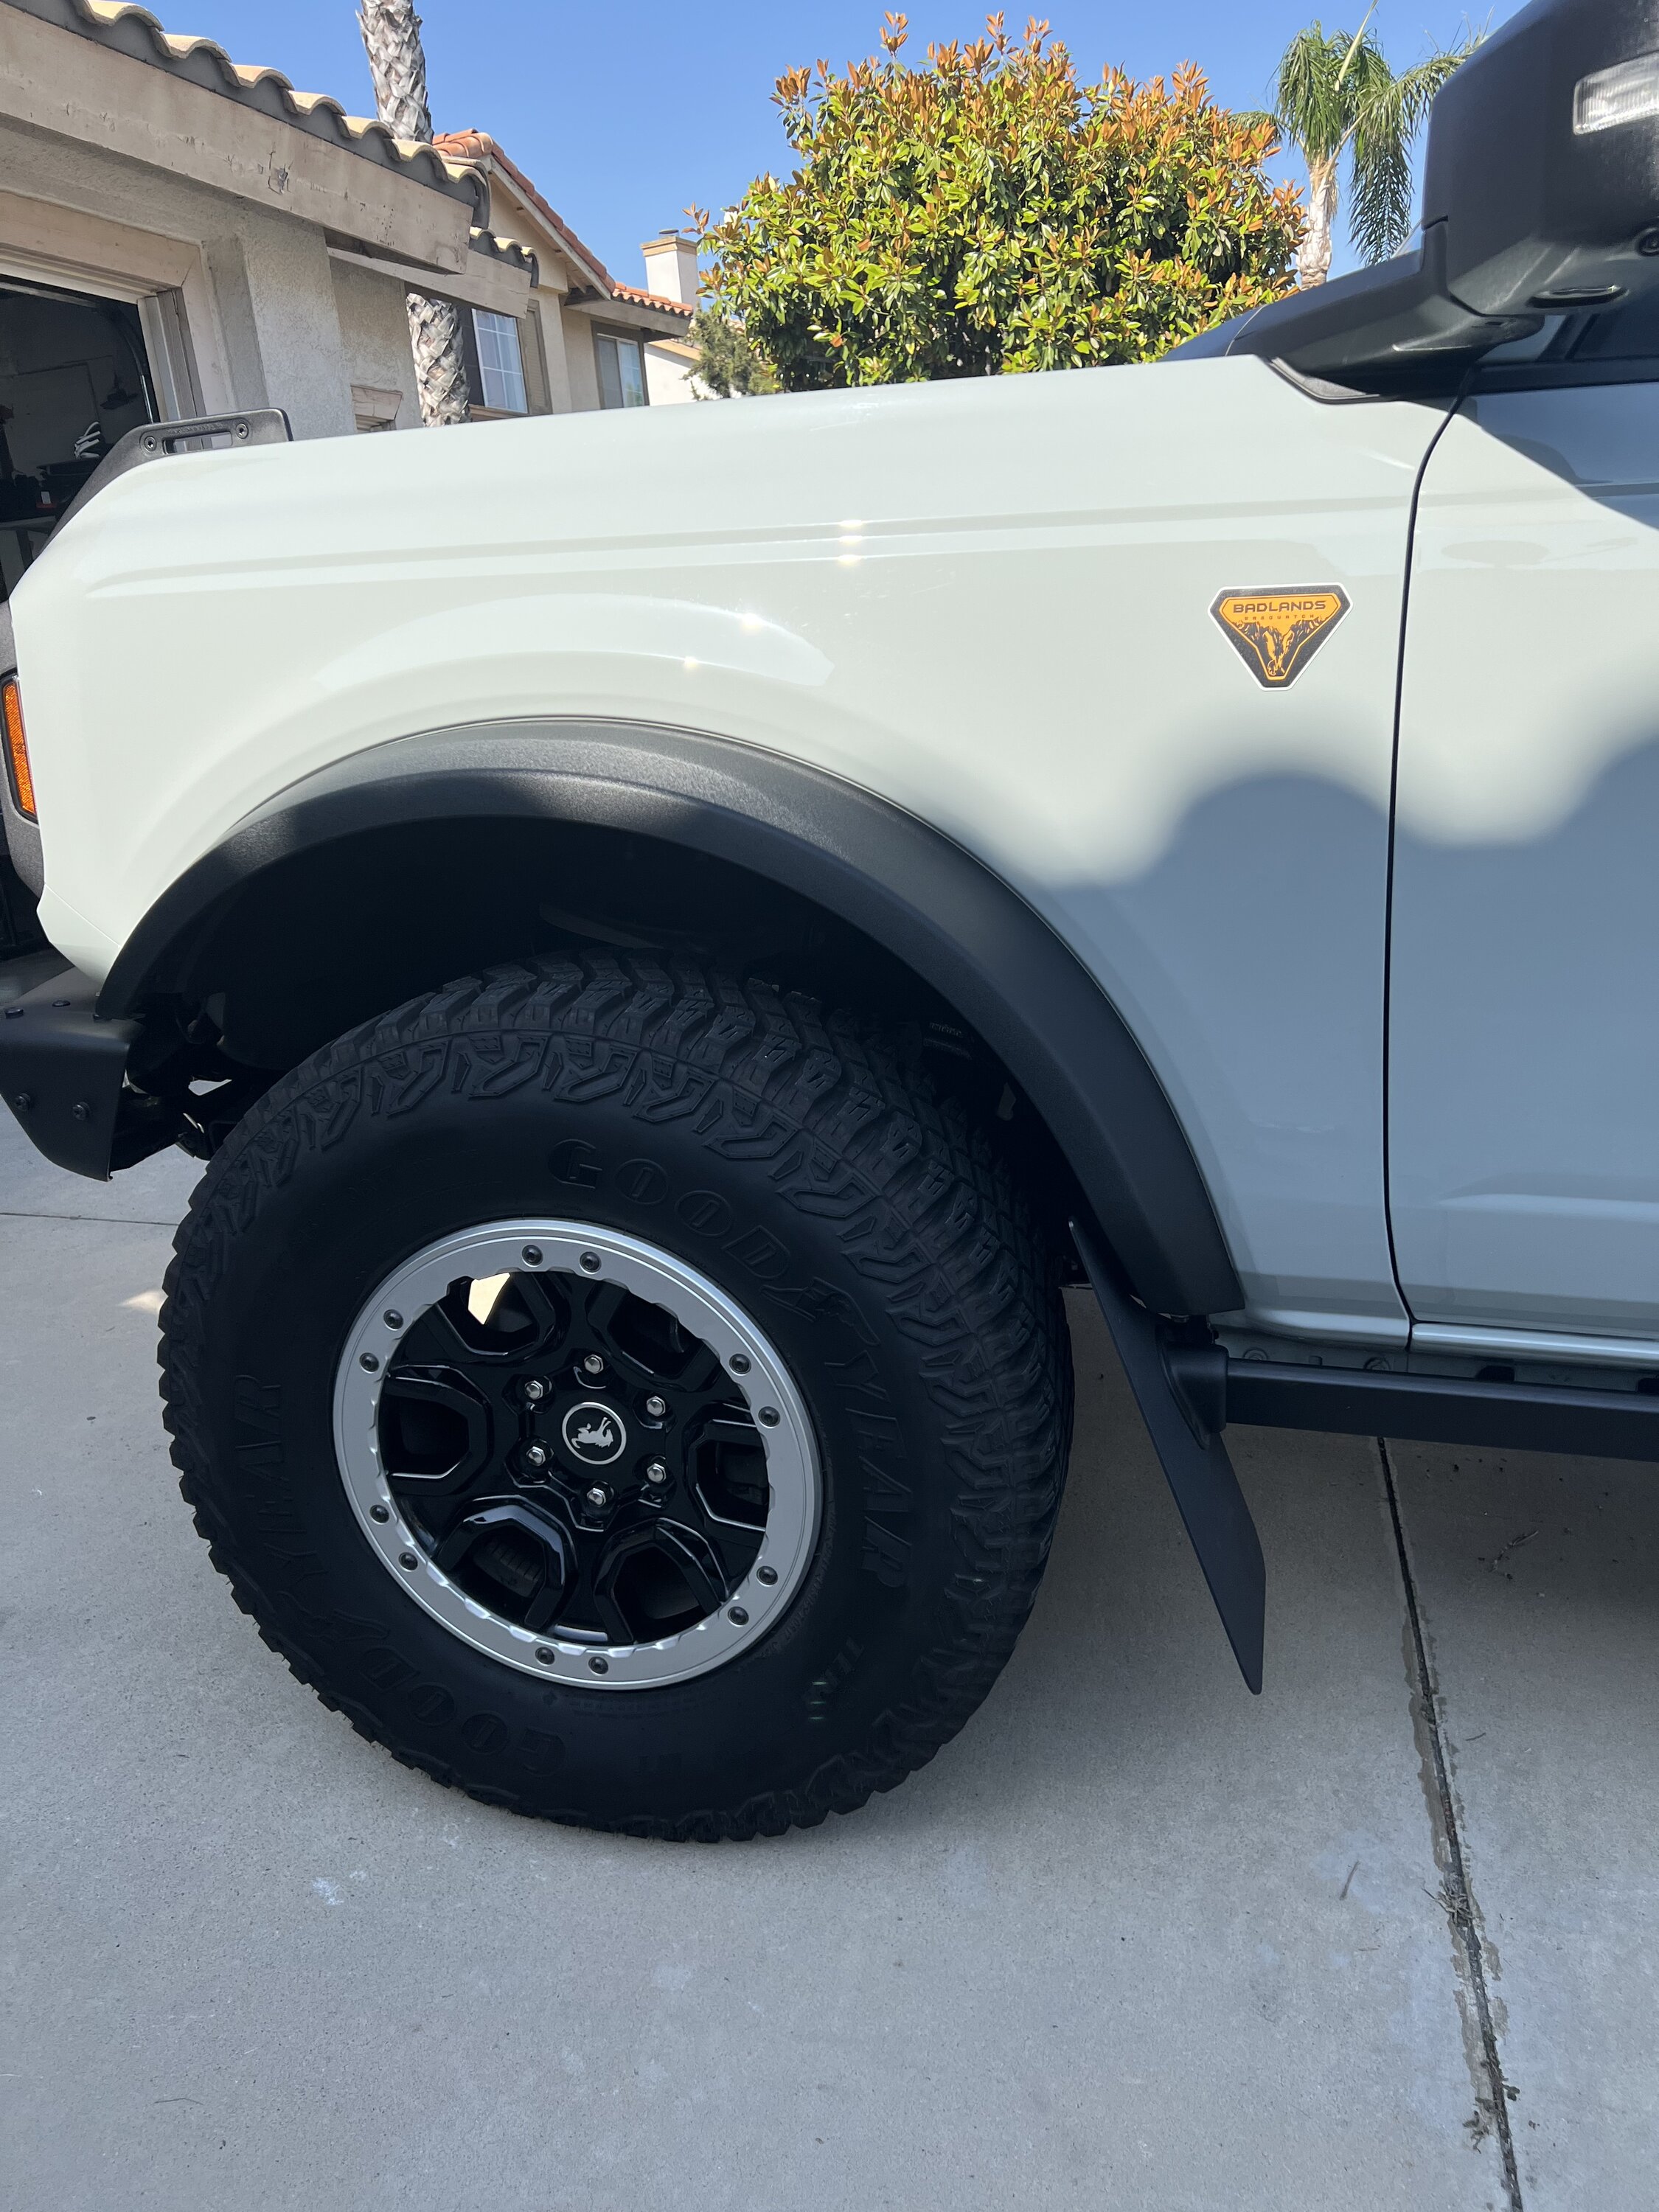 Ford Bronco BLUMAK3D Mud Flaps Install and Review FD5CE9AF-108C-417F-8C85-E5206033697B